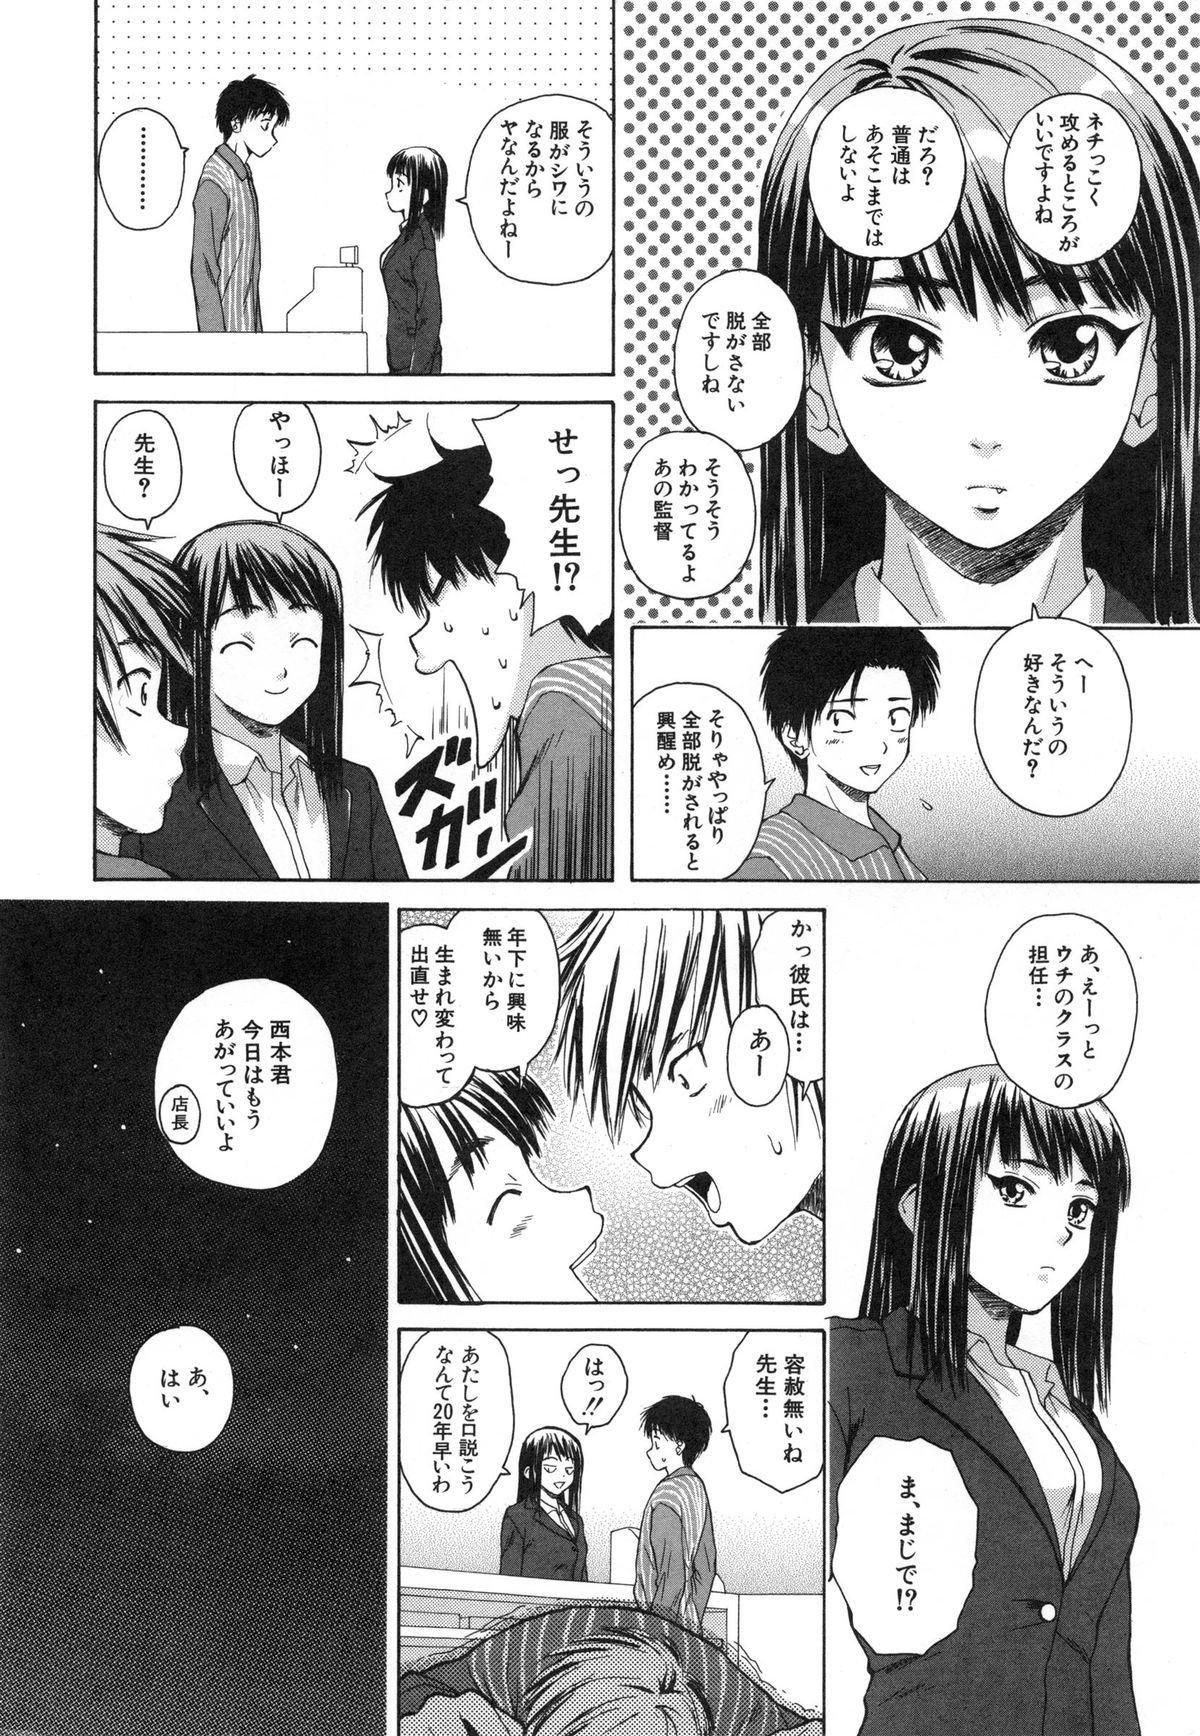 Daring Kyoushi to Seito to - Teacher and Student Hardcore Rough Sex - Page 10